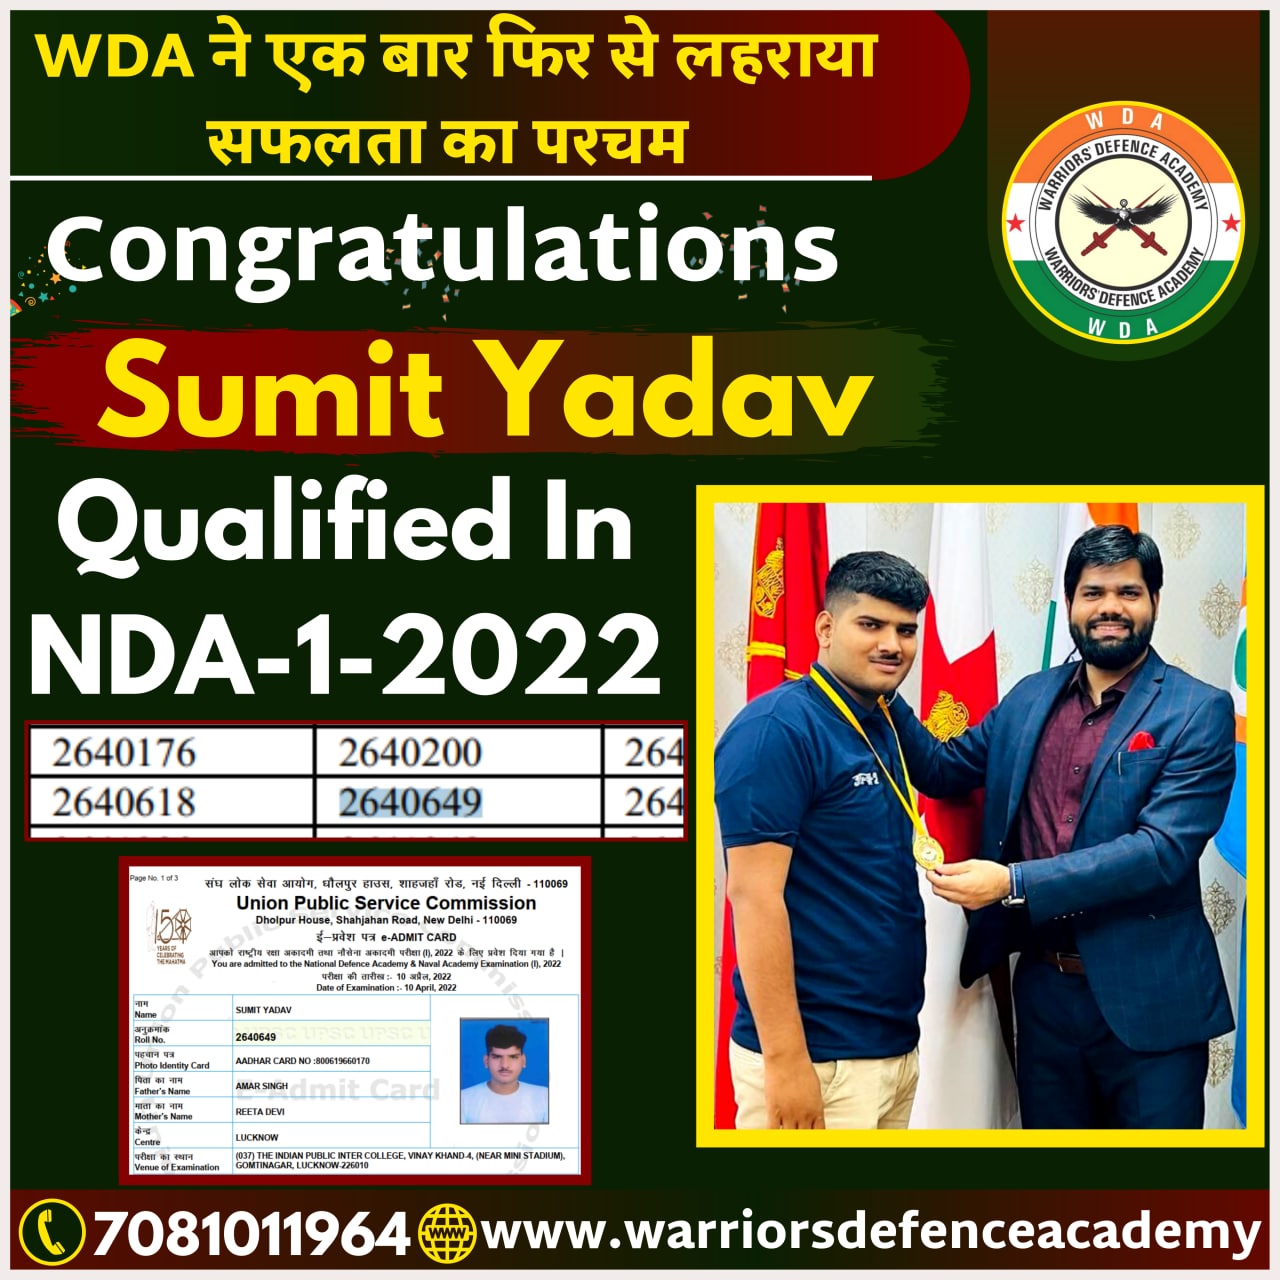 Best NDA Coaching in Lucknow | Top NDA Coaching in India | Warriors Defence Academy Lucknow